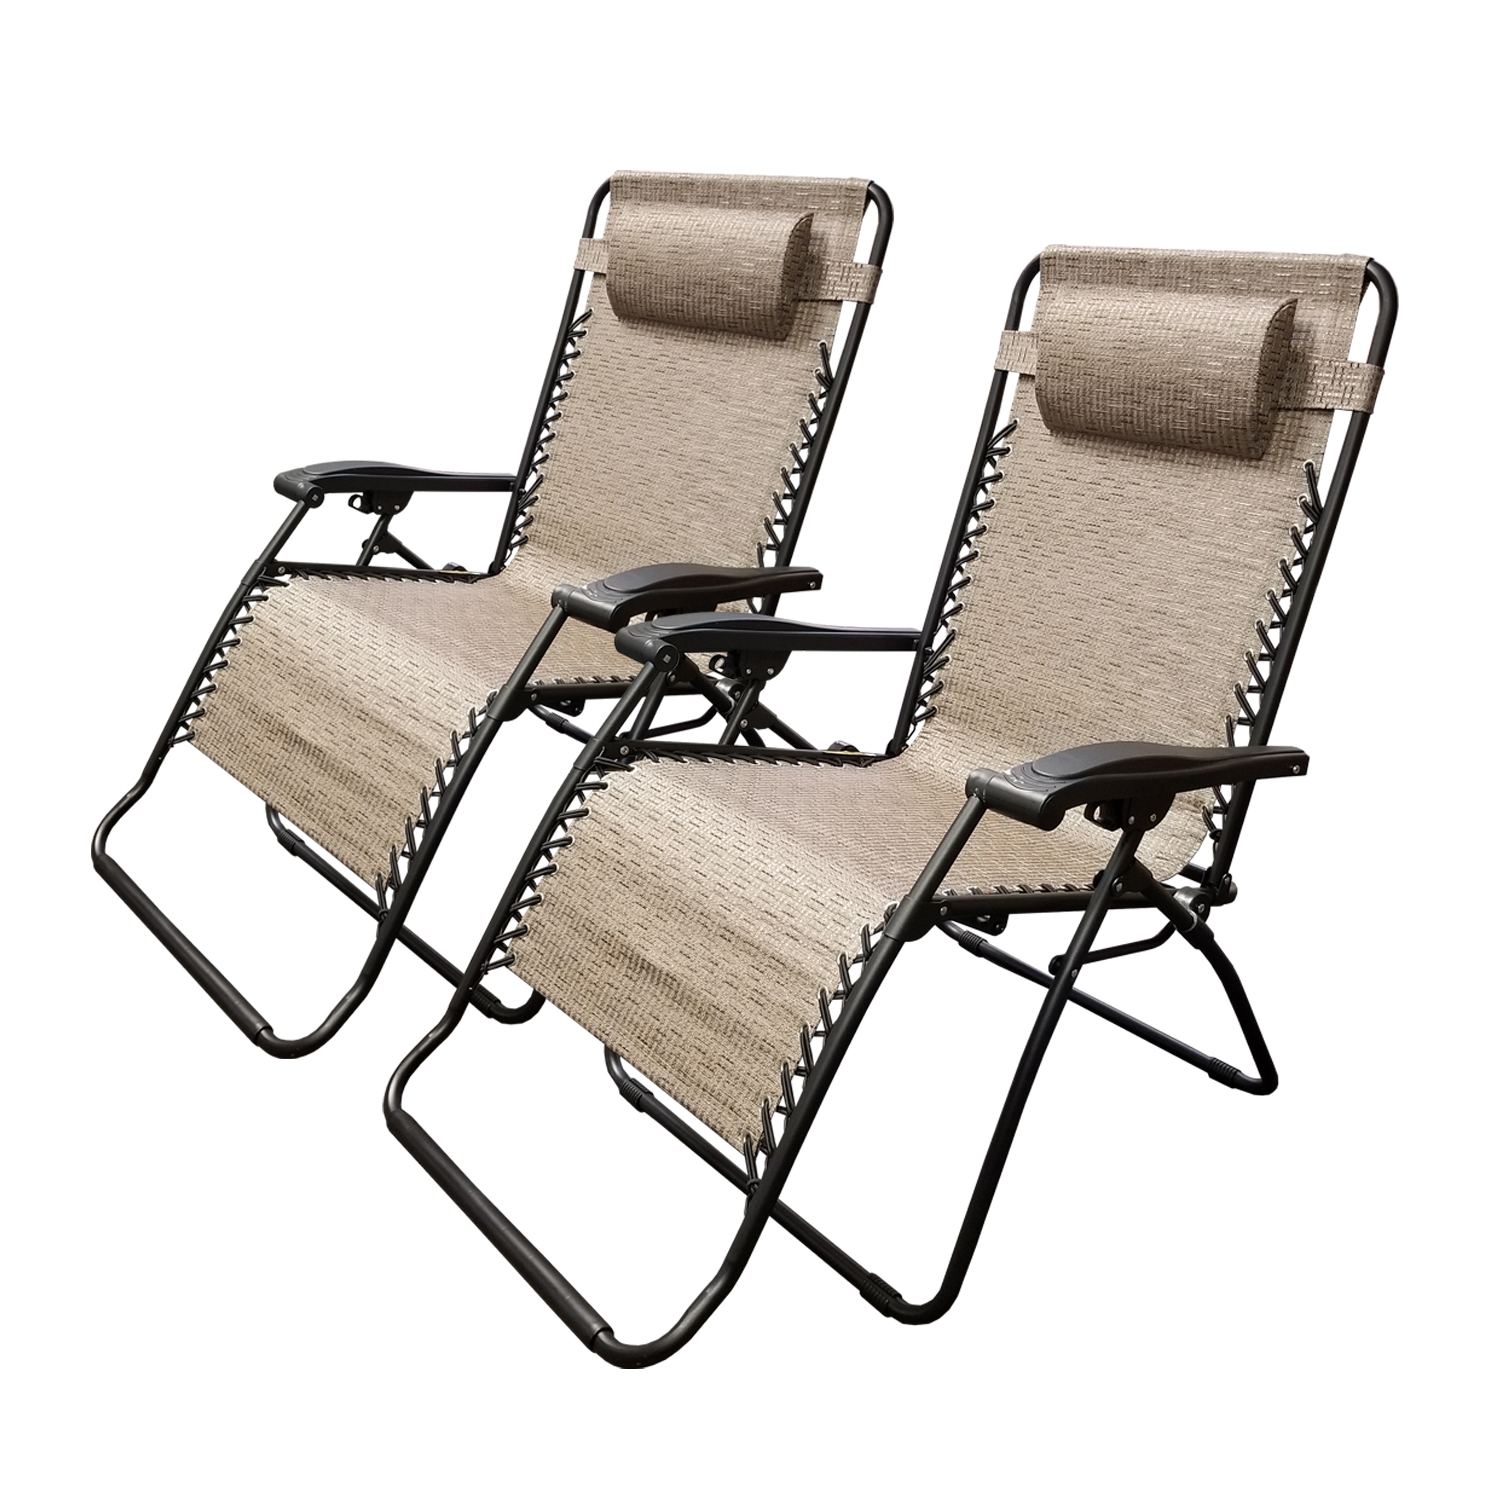 Caravan Canopy Beige Zero-Gravity Chairs Pack of Two Reclining Lounge 300 Lb Cap 